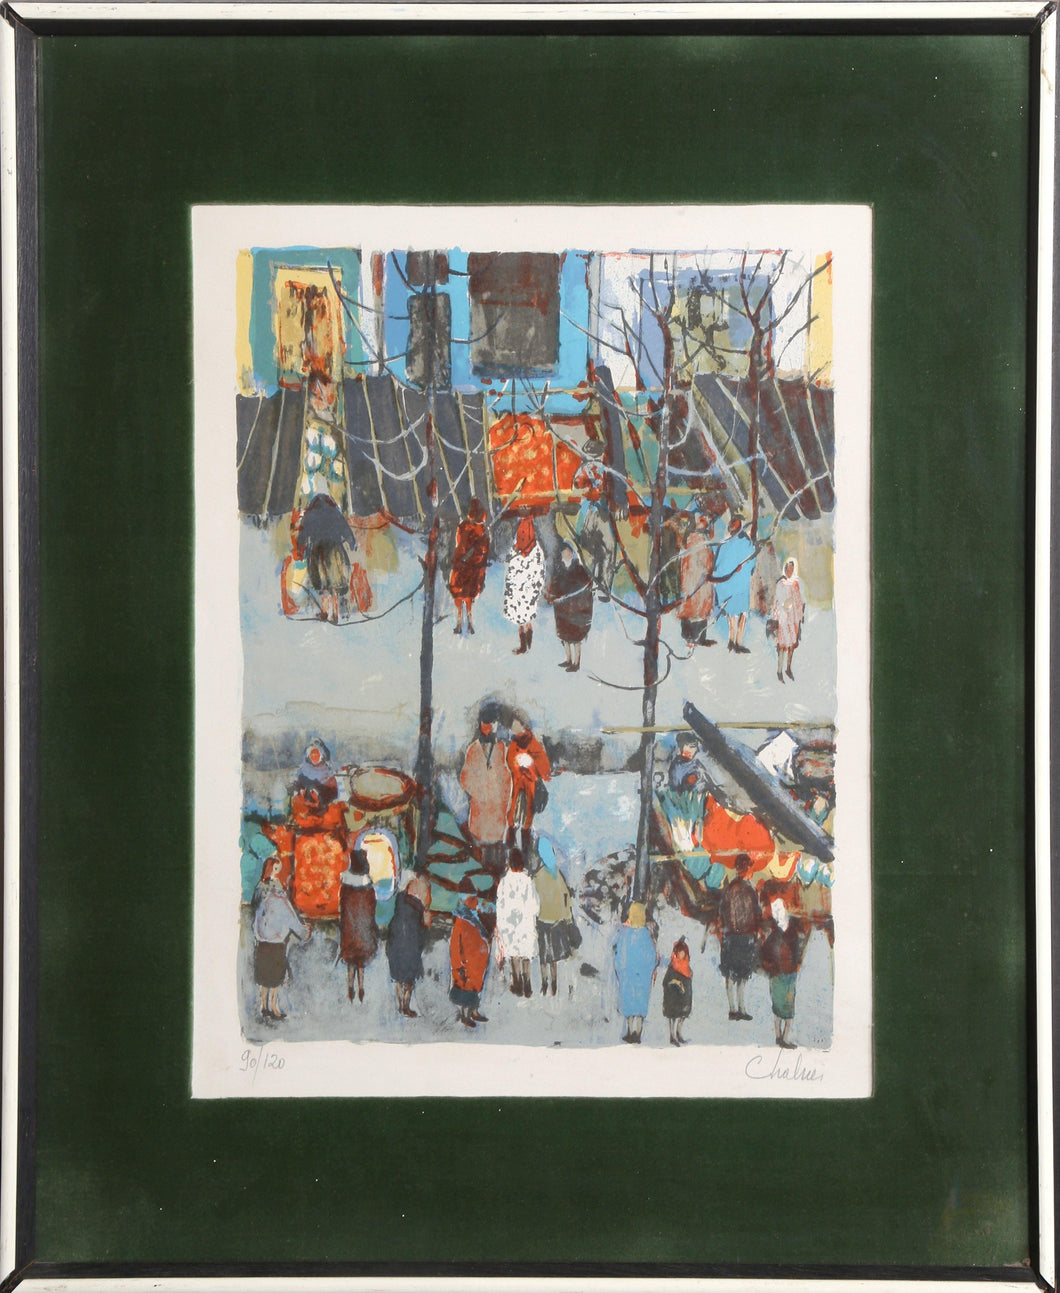 Scene de Rue d'Hiver Lithograph | Nathalie Chabrier,{{product.type}}